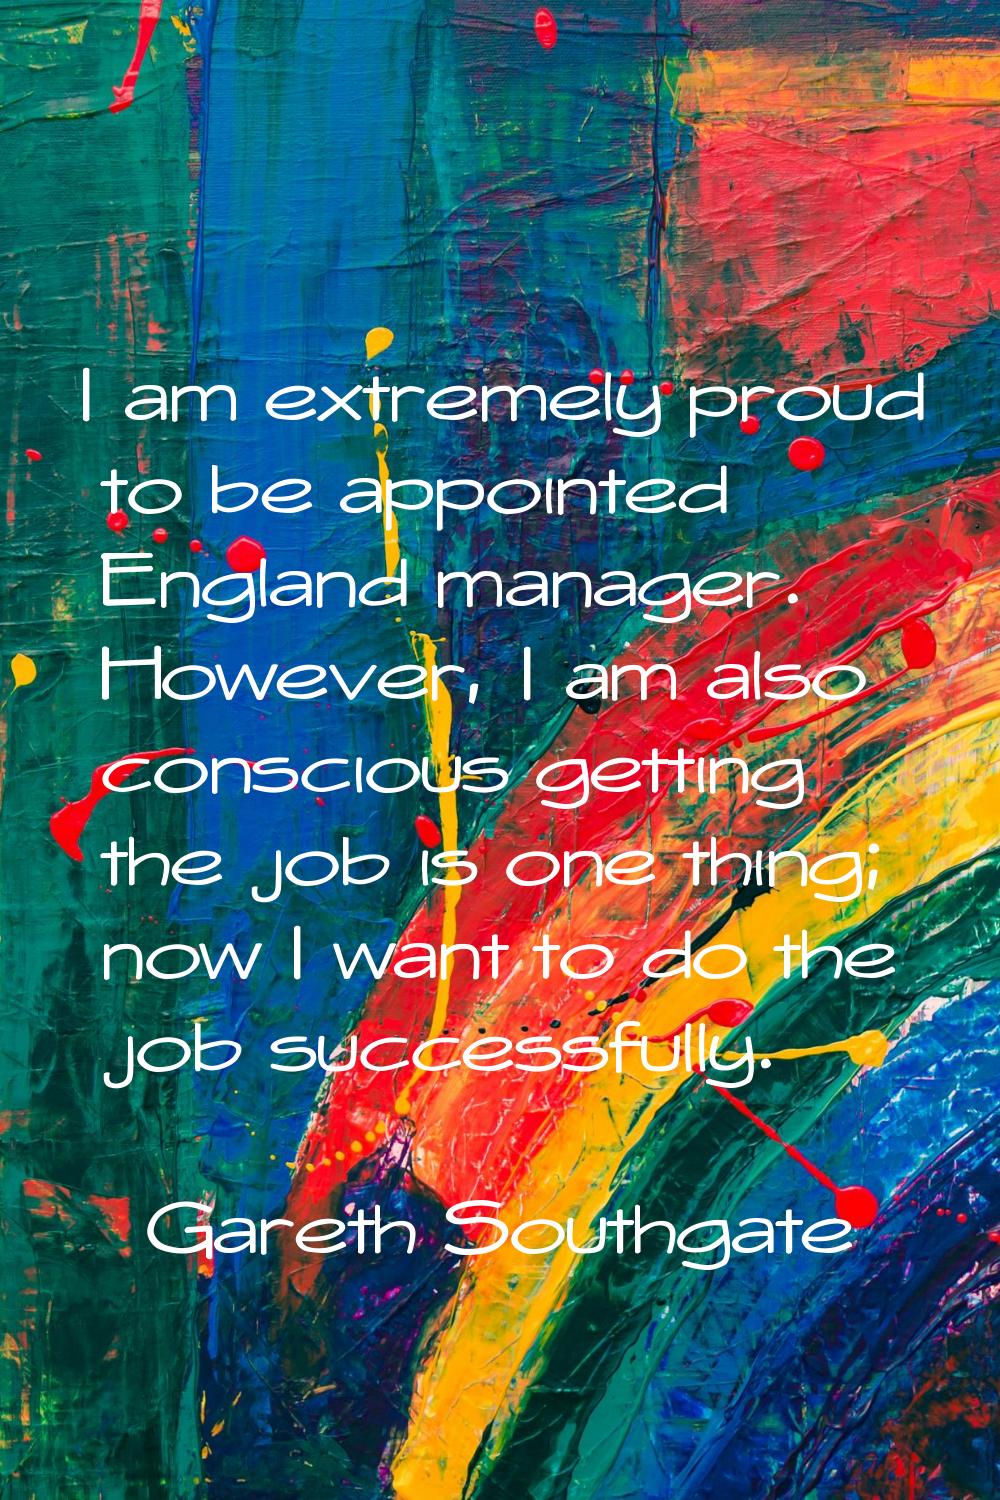 I am extremely proud to be appointed England manager. However, I am also conscious getting the job 